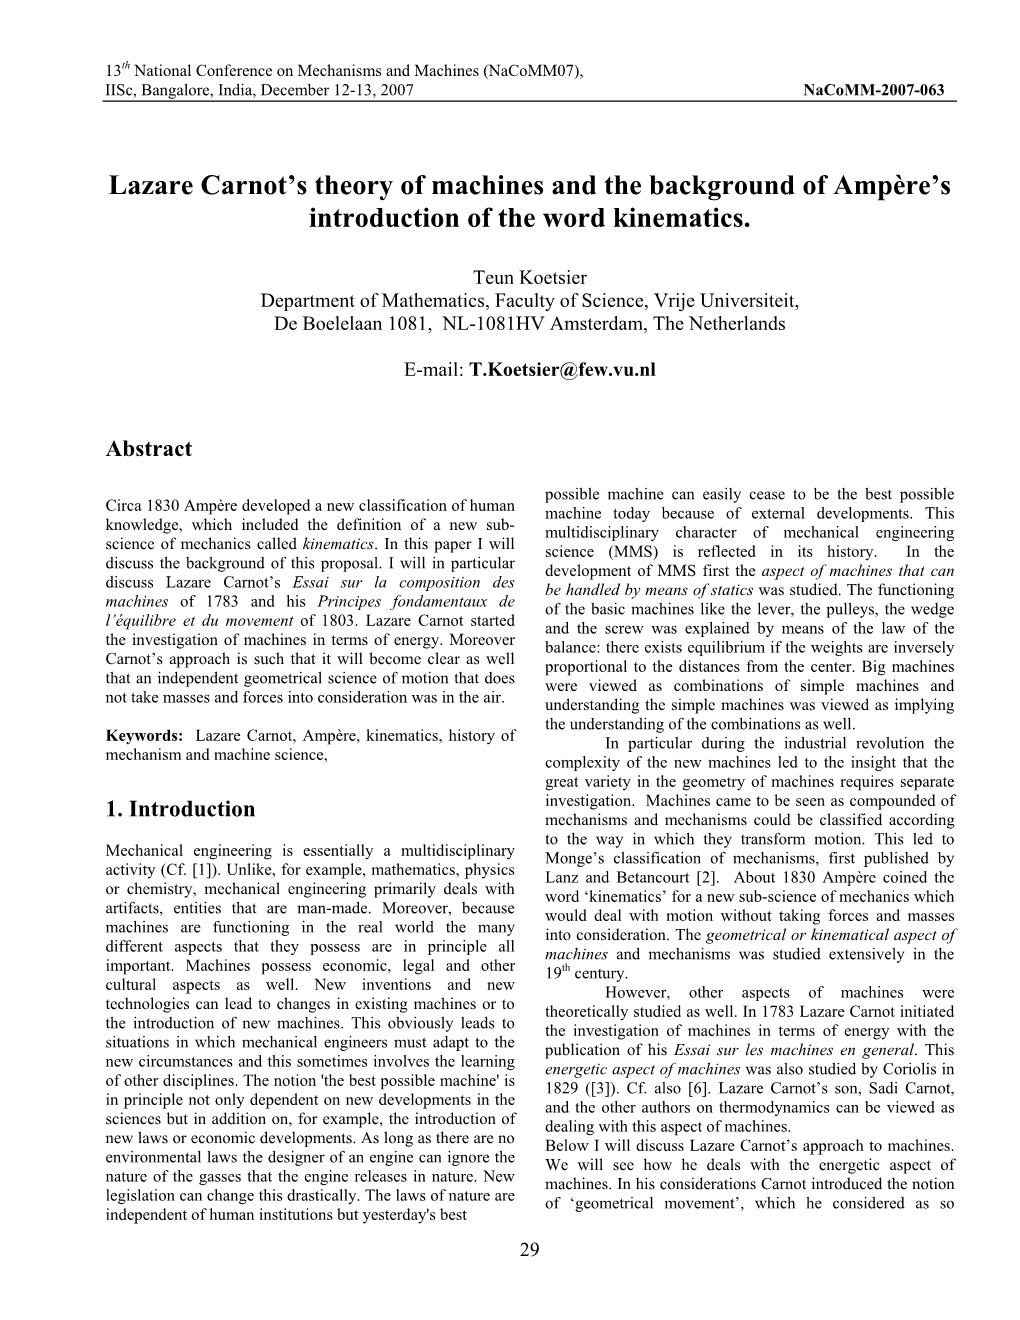 Lazare Carnot's Theory of Machines and the Background of Ampère's